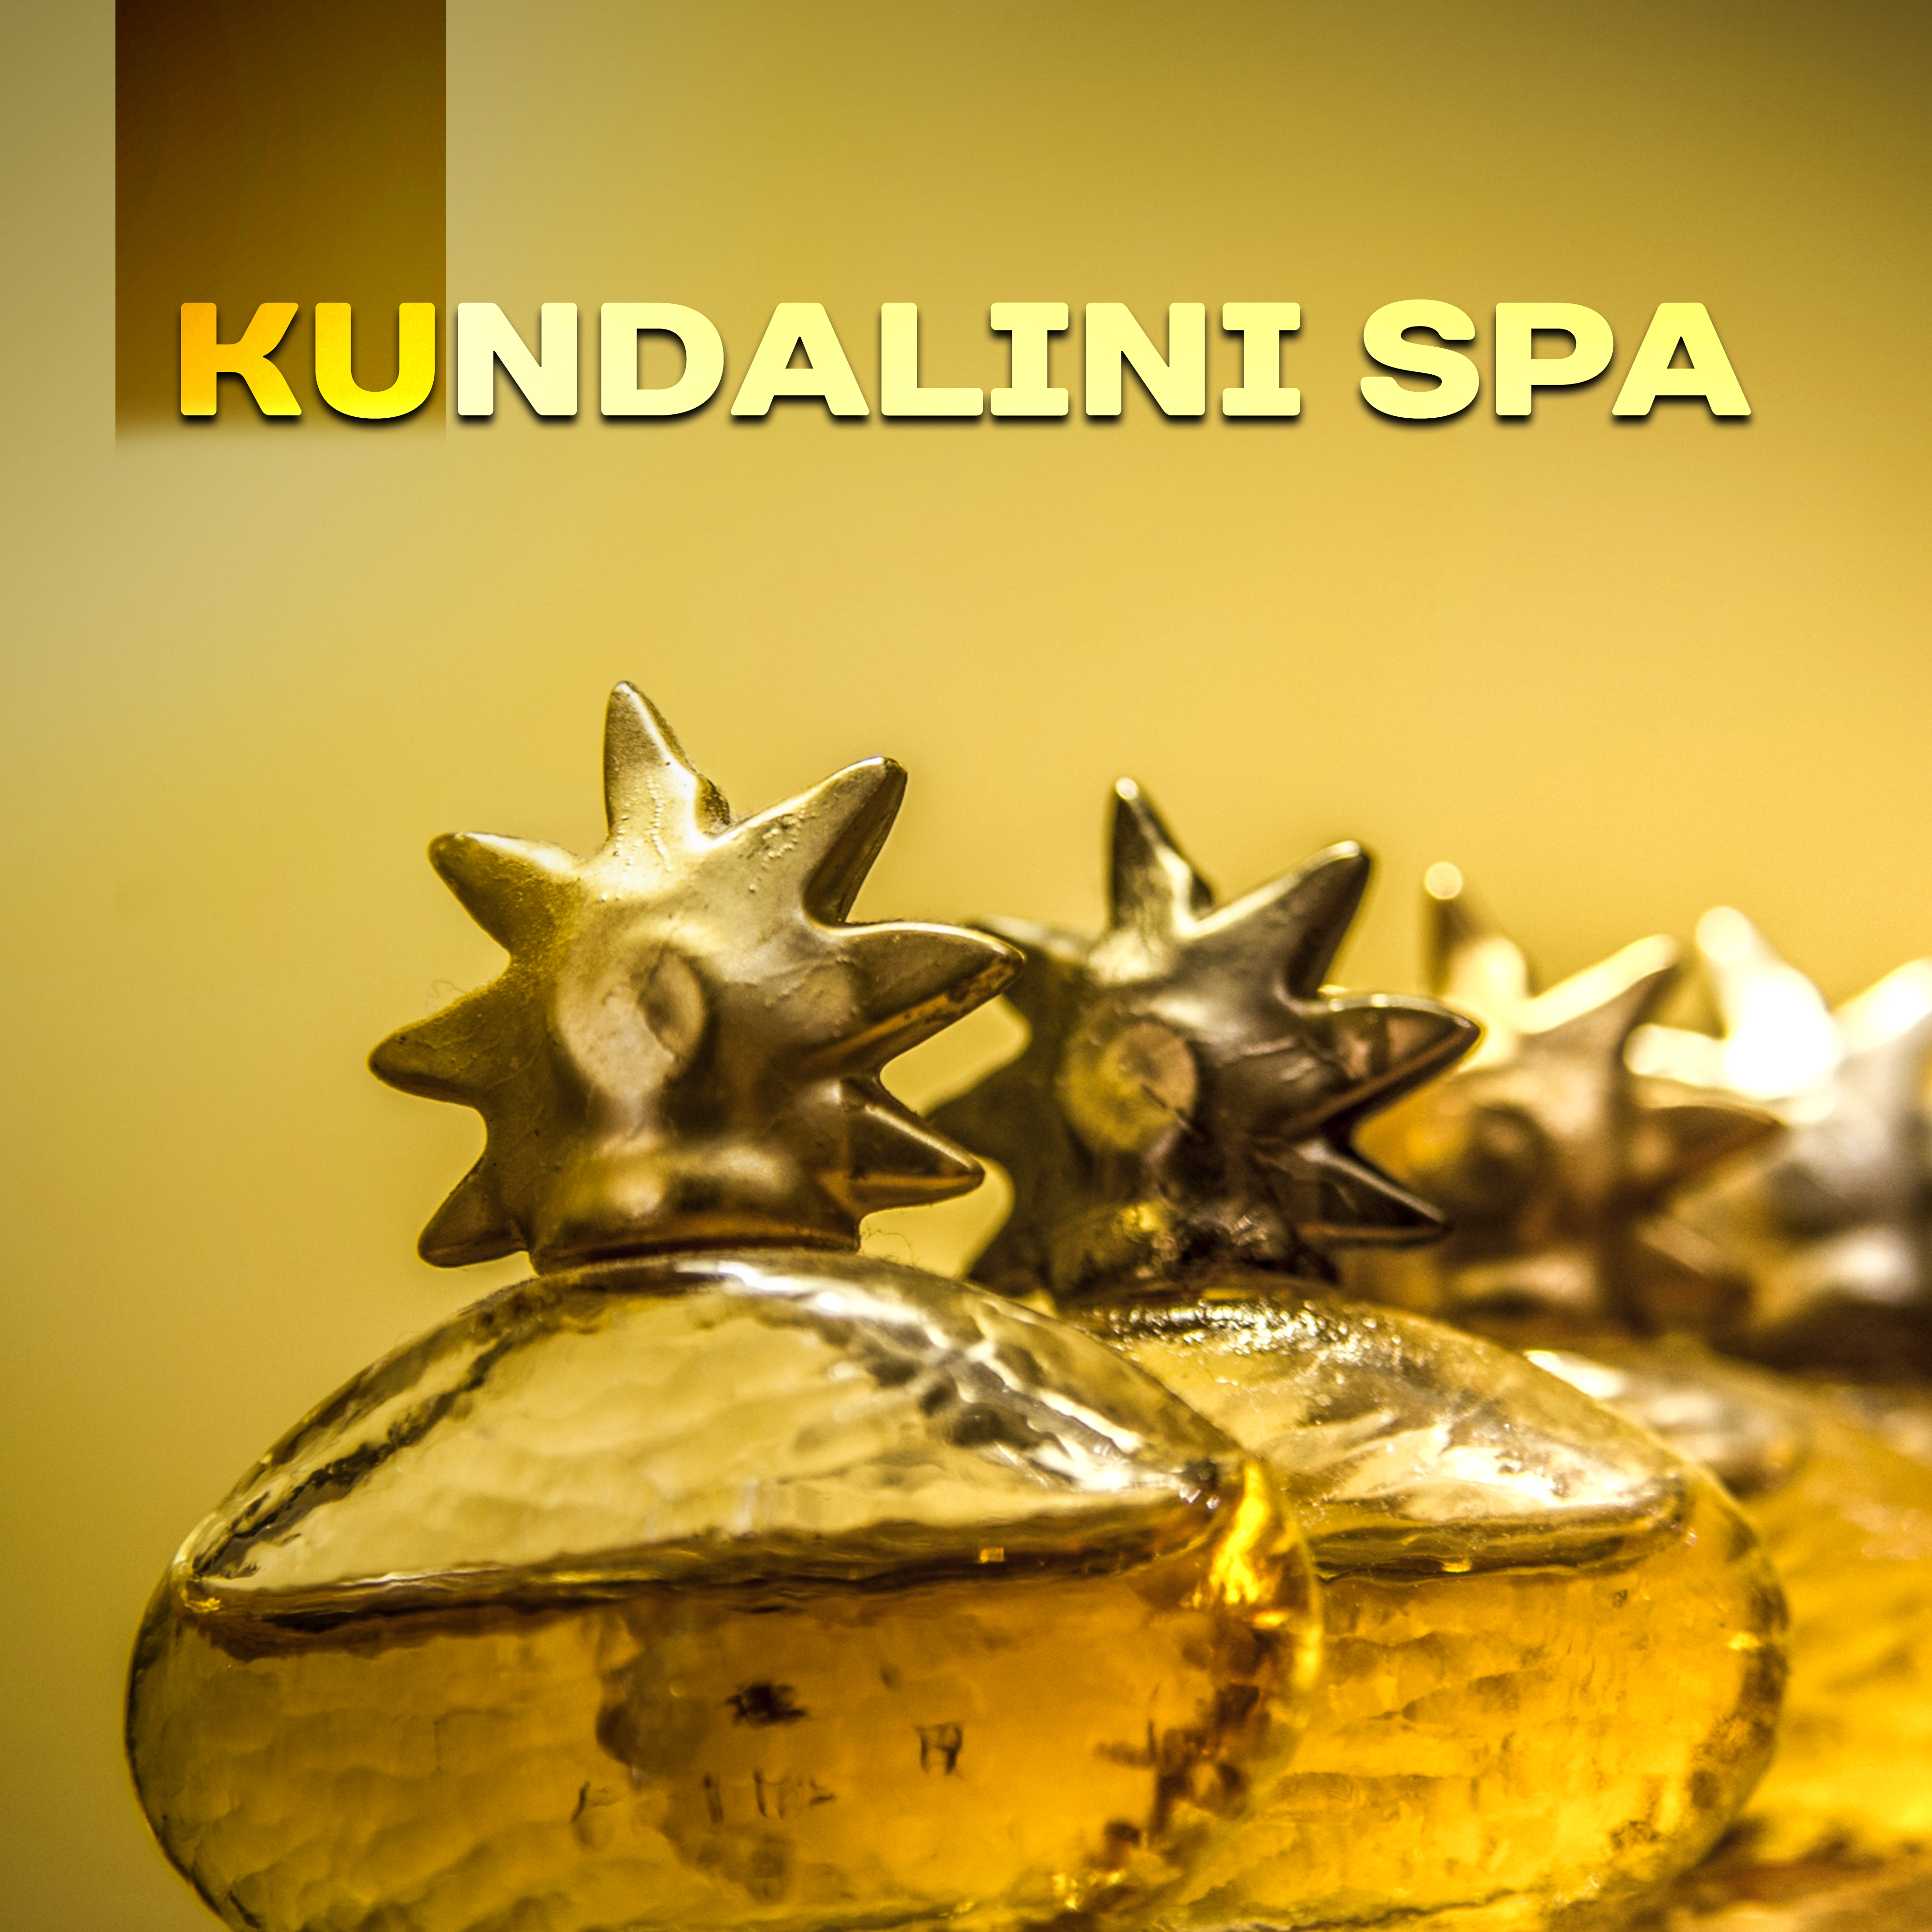 Kundalini Spa – Oriental Music for Massage, Wellness, Soothing Nature Sounds, Stress Relief, Meditation, Healing Nature, Inner Calmness